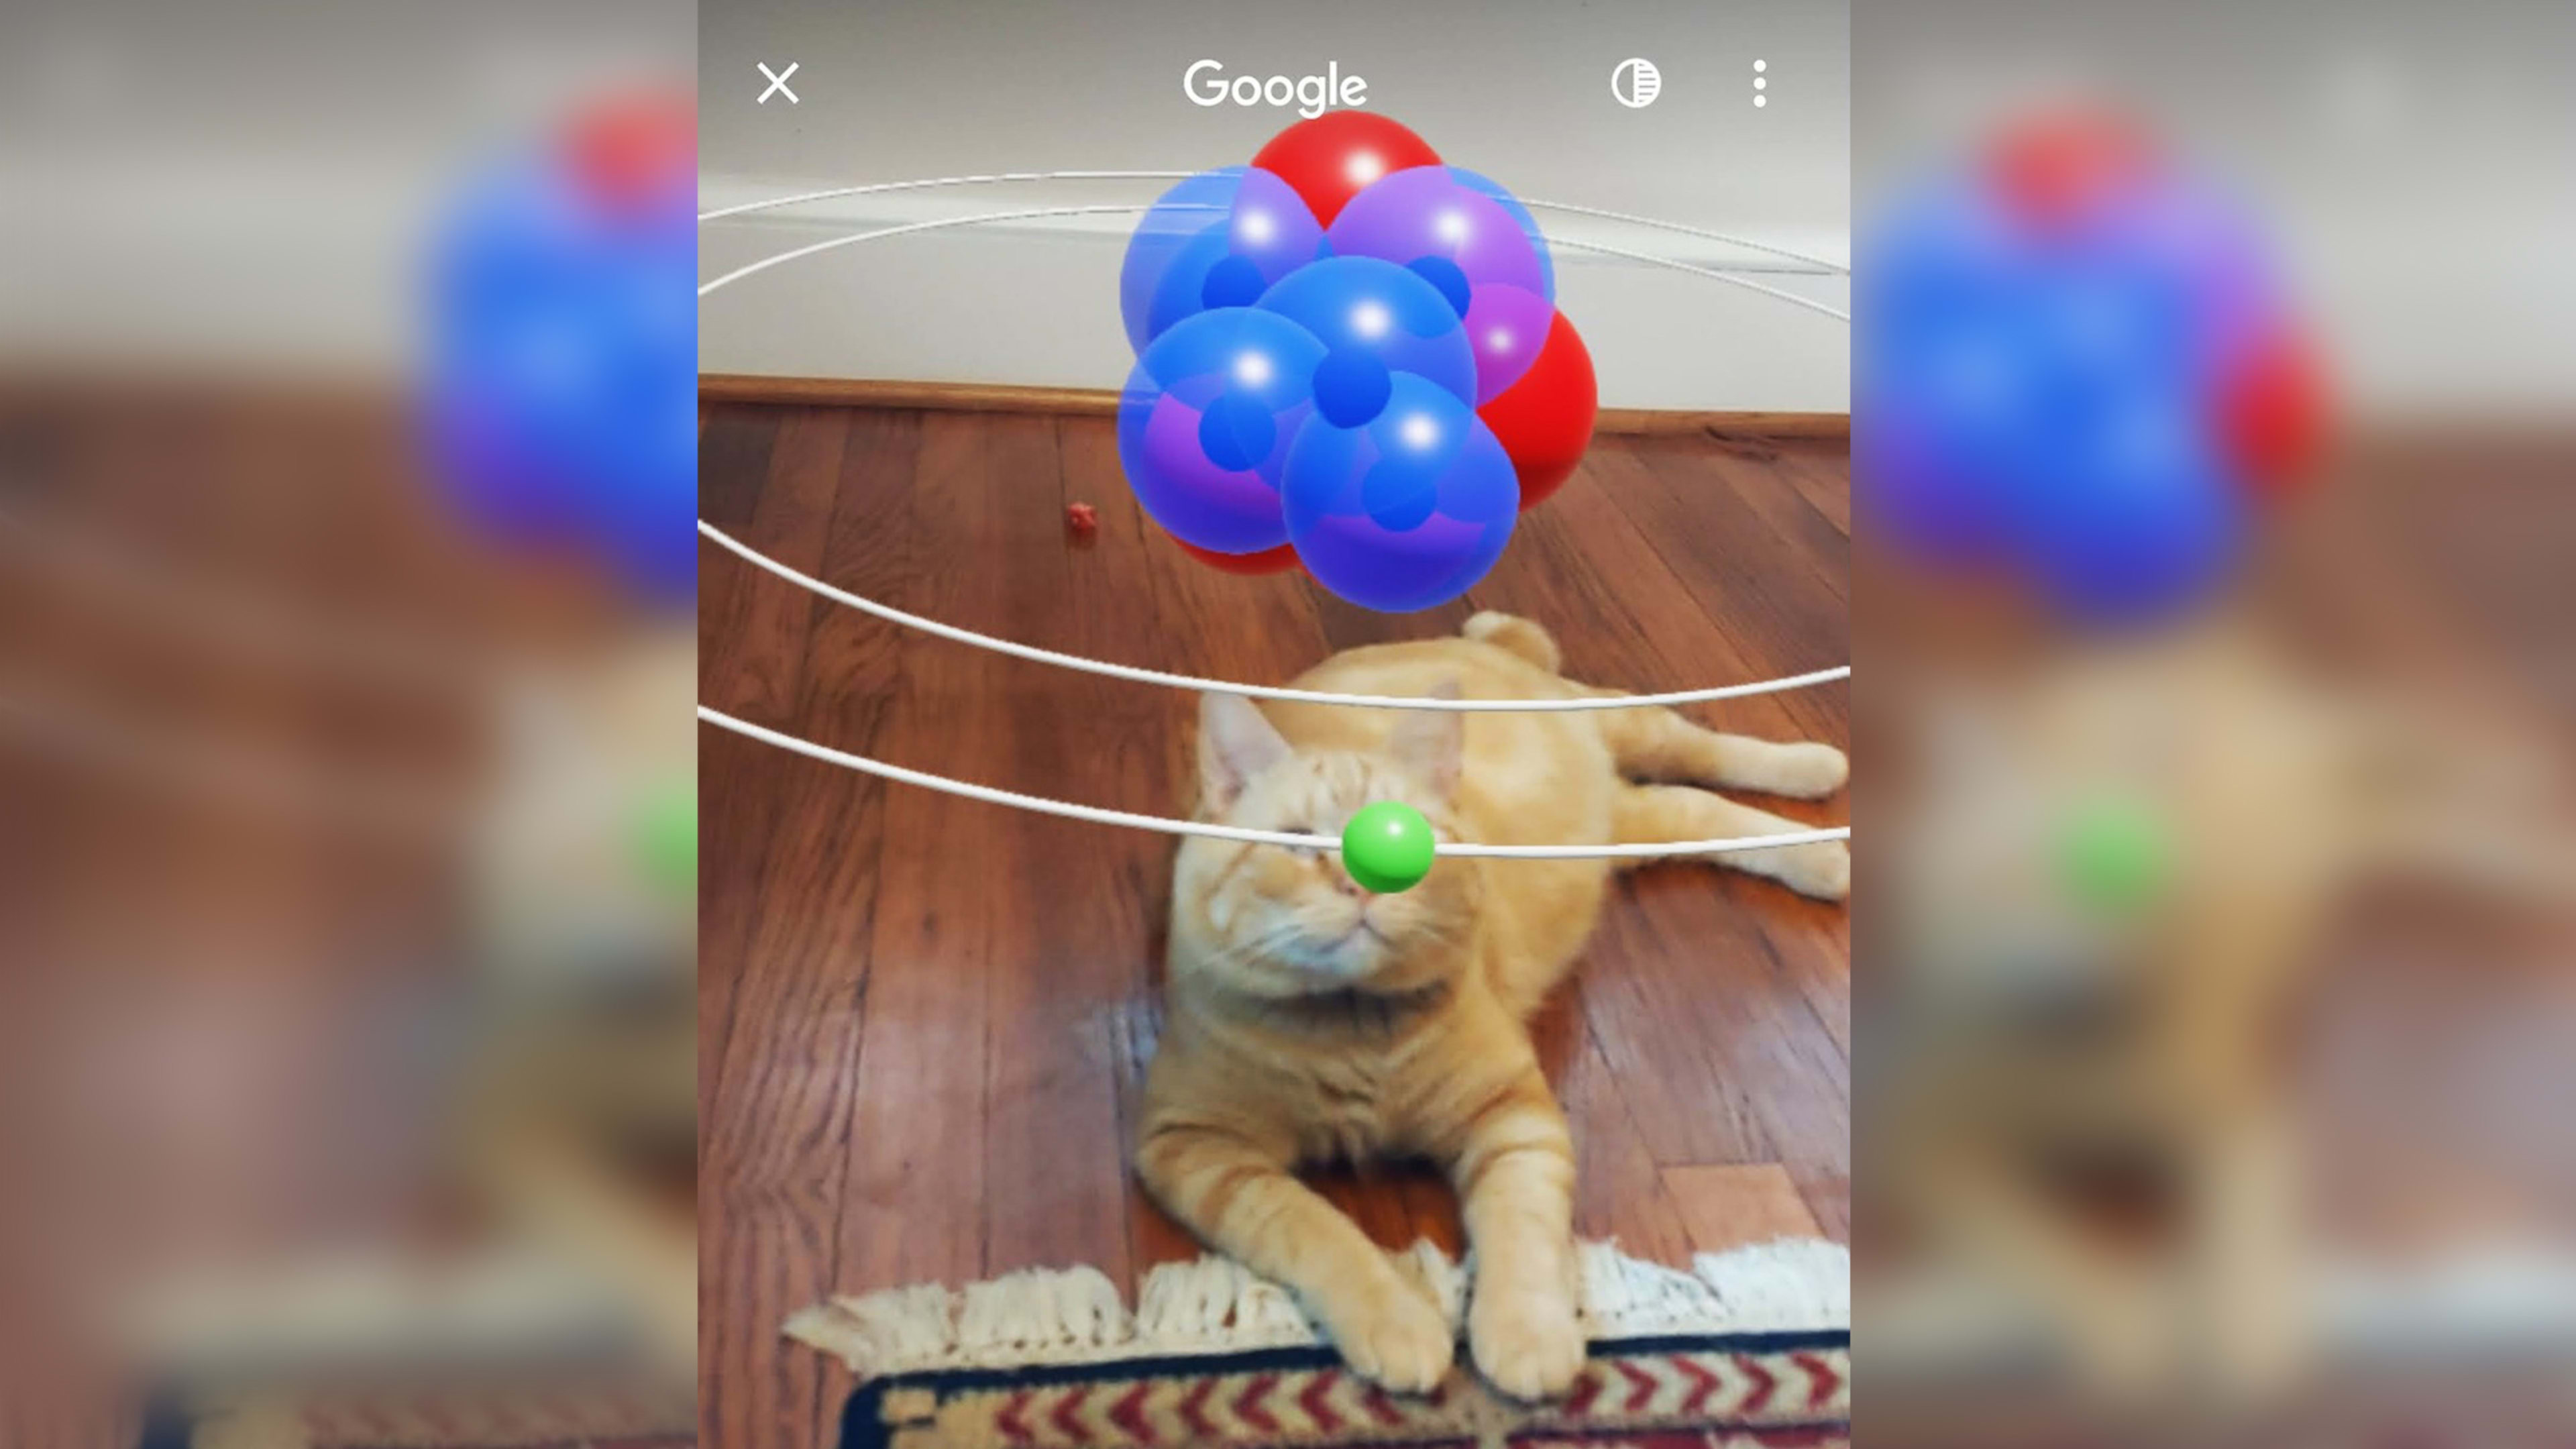 AR is finally infiltrating everyday tasks such as Google search